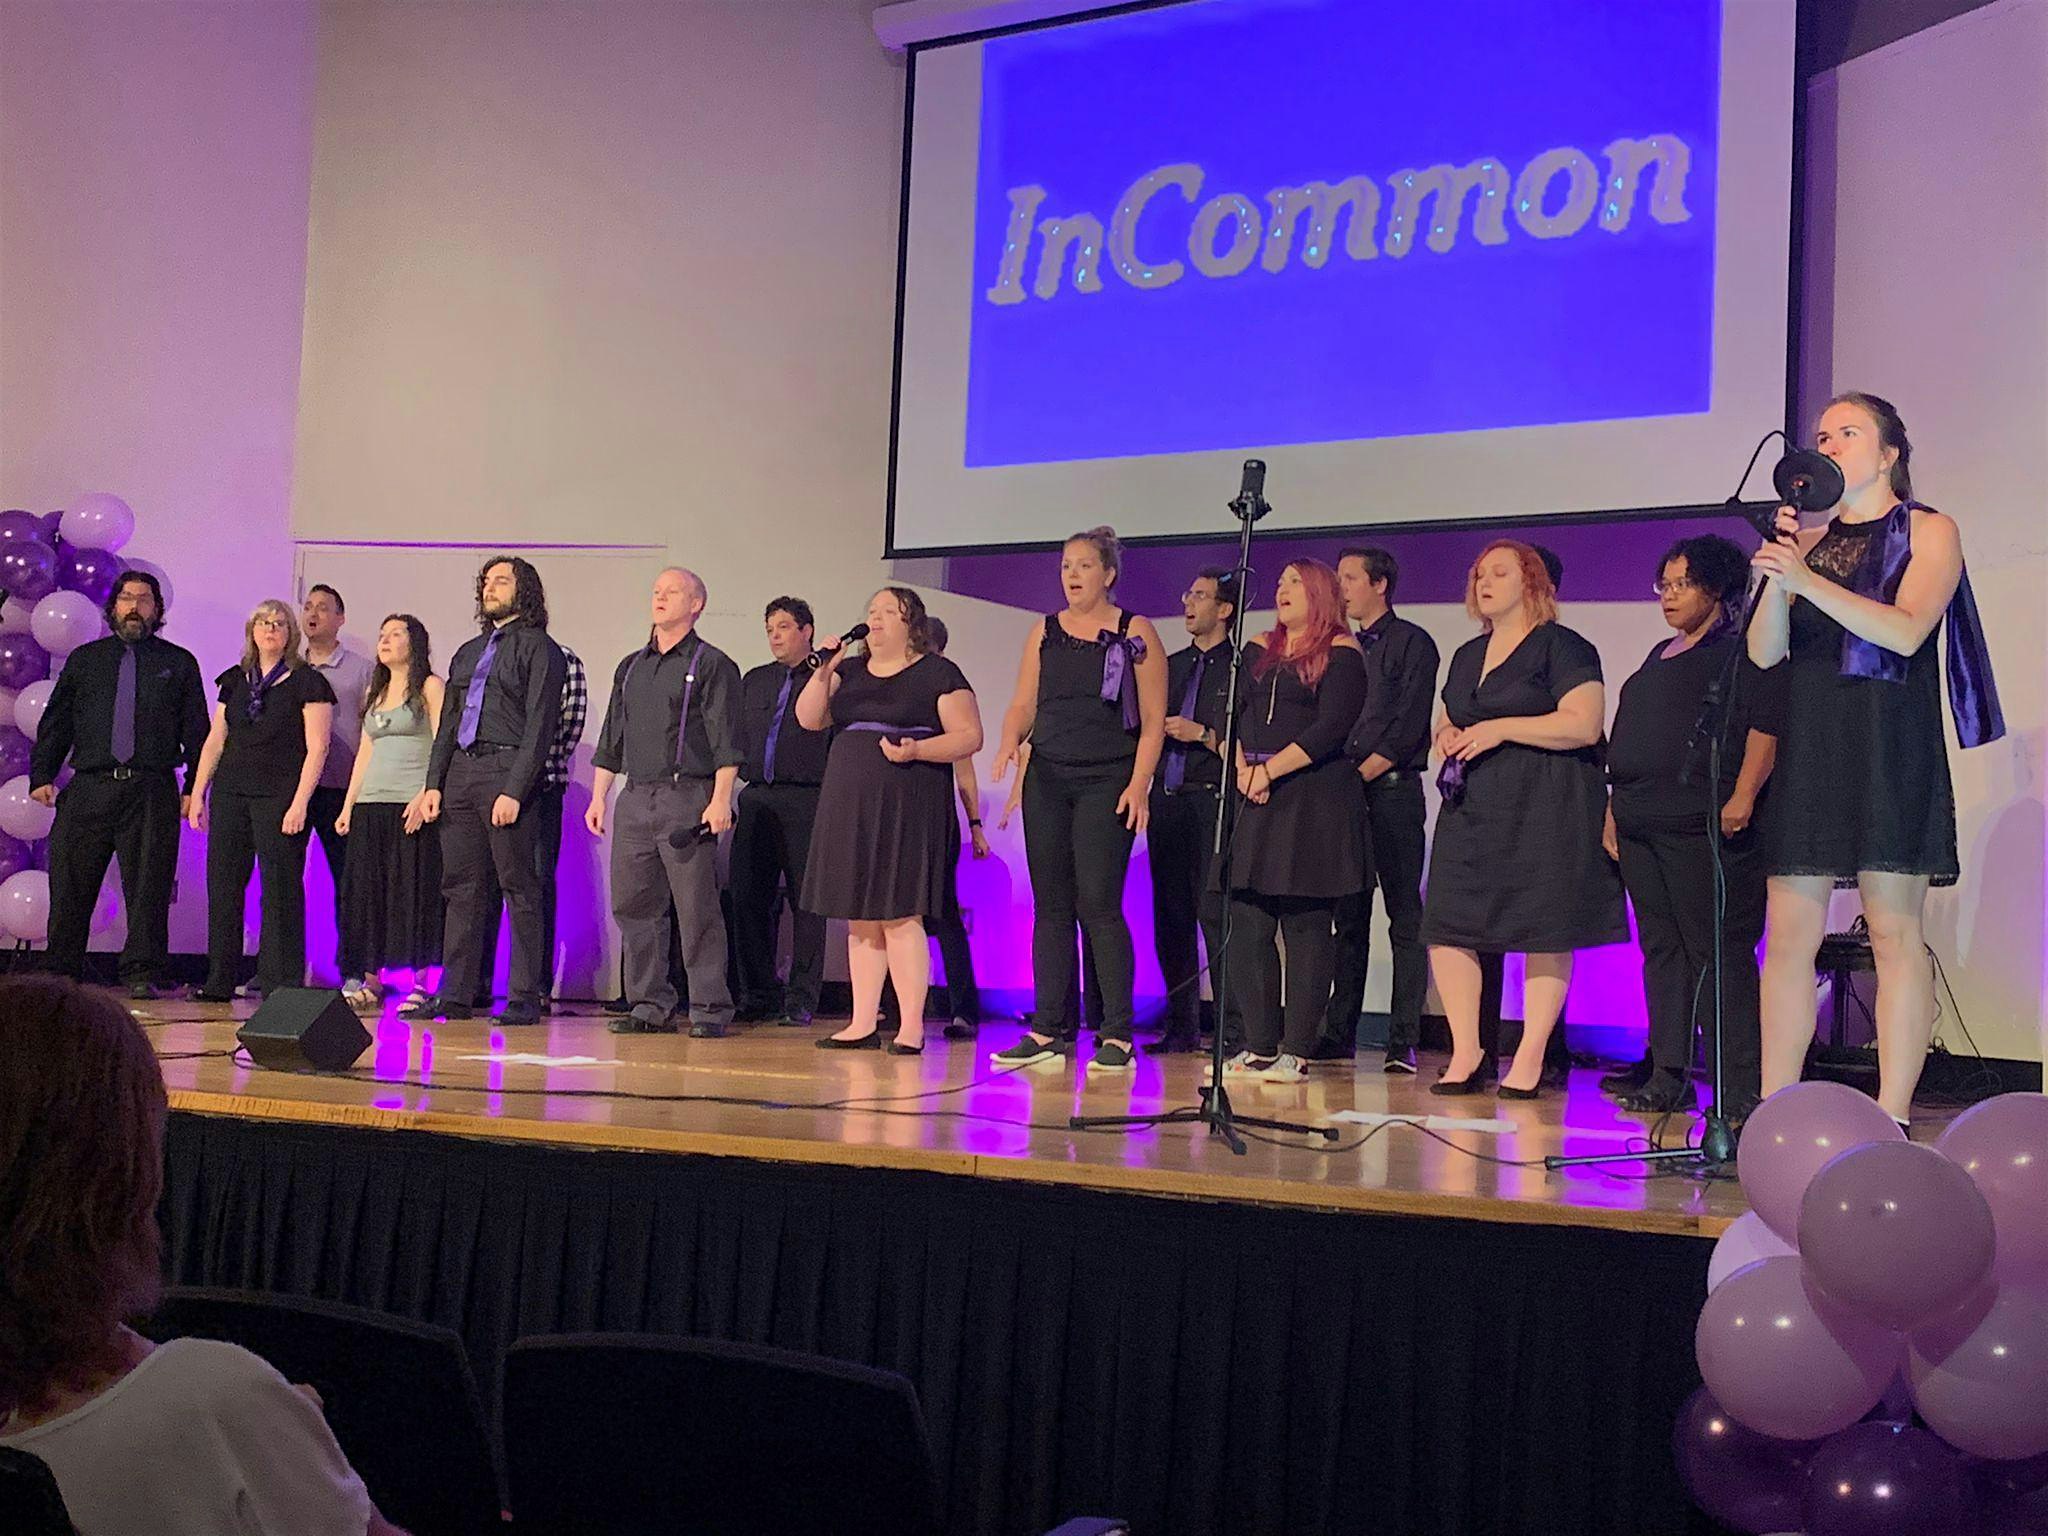 Spring Singing with InCommon A Cappella